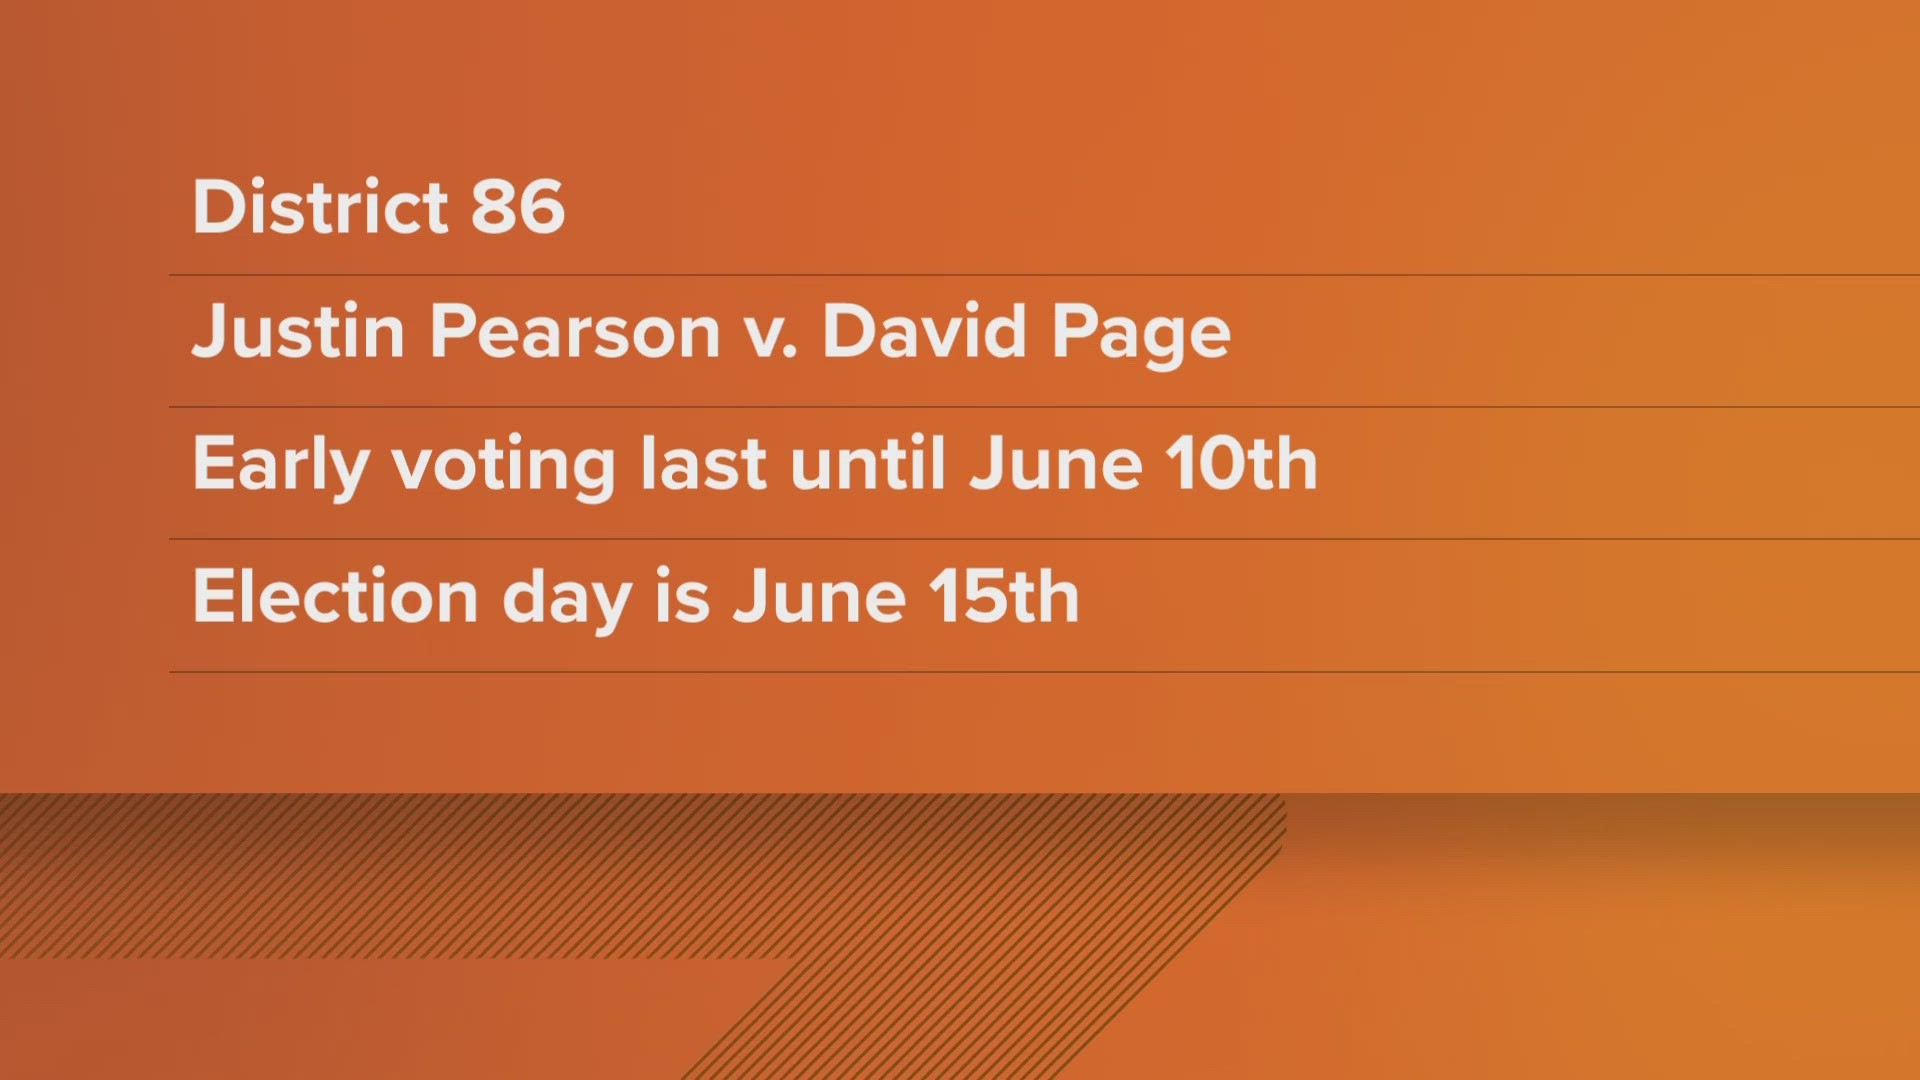 After being expelled in the Tennessee General Assembly in March, Rep. Justin Pearson is running to officially get his seat back against David Page.